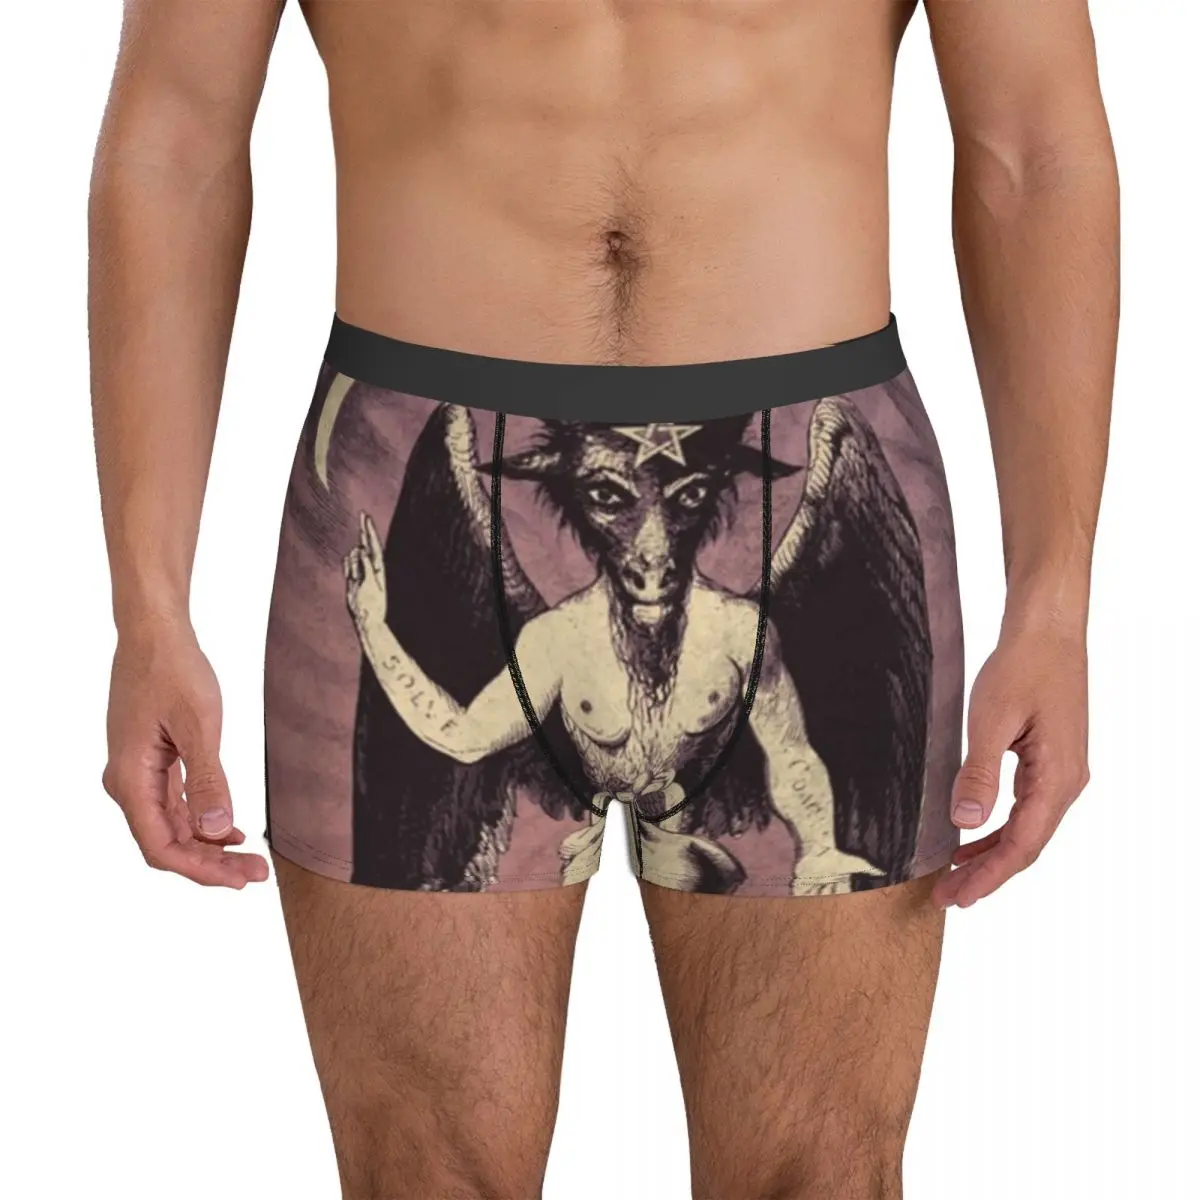 Baphomet Underwear witchcraft illuminati occult goat Males Panties Printing Breathable Trunk High Quality Shorts Briefs Big Size